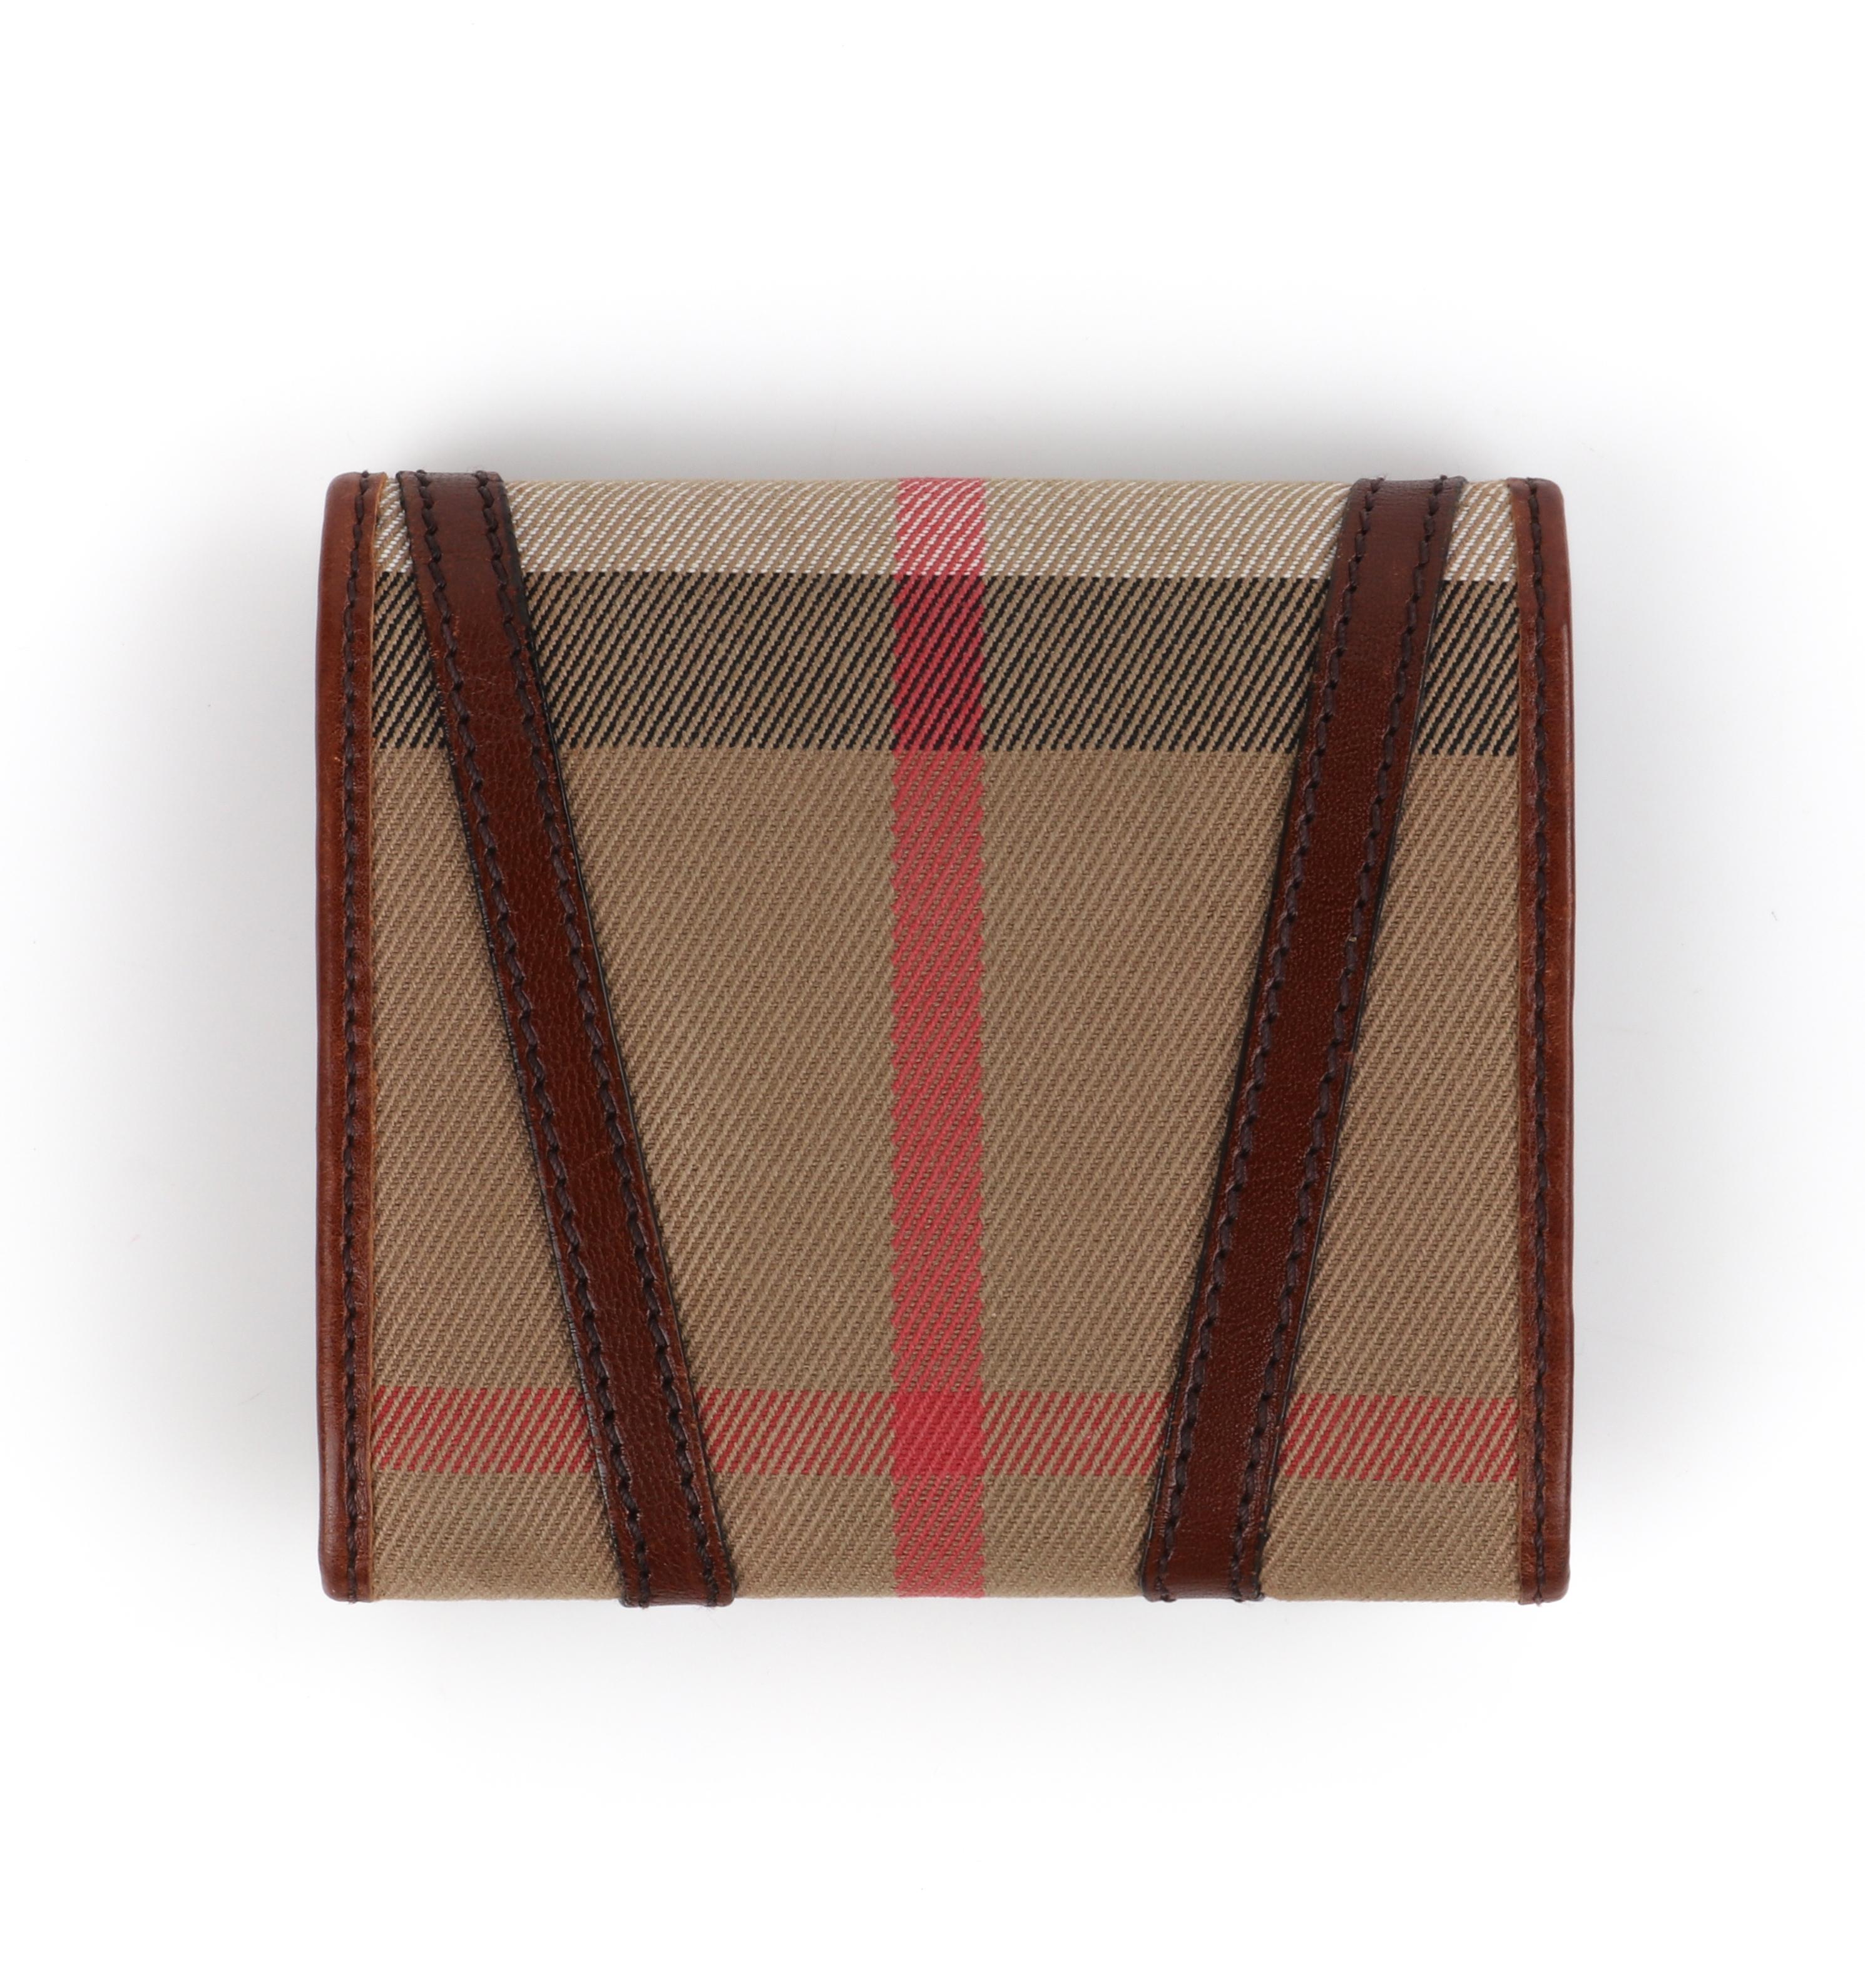 BURBERRY Nova Check Tartan Leather Trifold Square Compact Wallet
  
Brand / Manufacturer: Burberry
Designer: Christopher Bailey
Style: Trifold wallet 
Color(s): Shades of brown, red, black, white (exterior, interior); gold (hardware)
Lined: